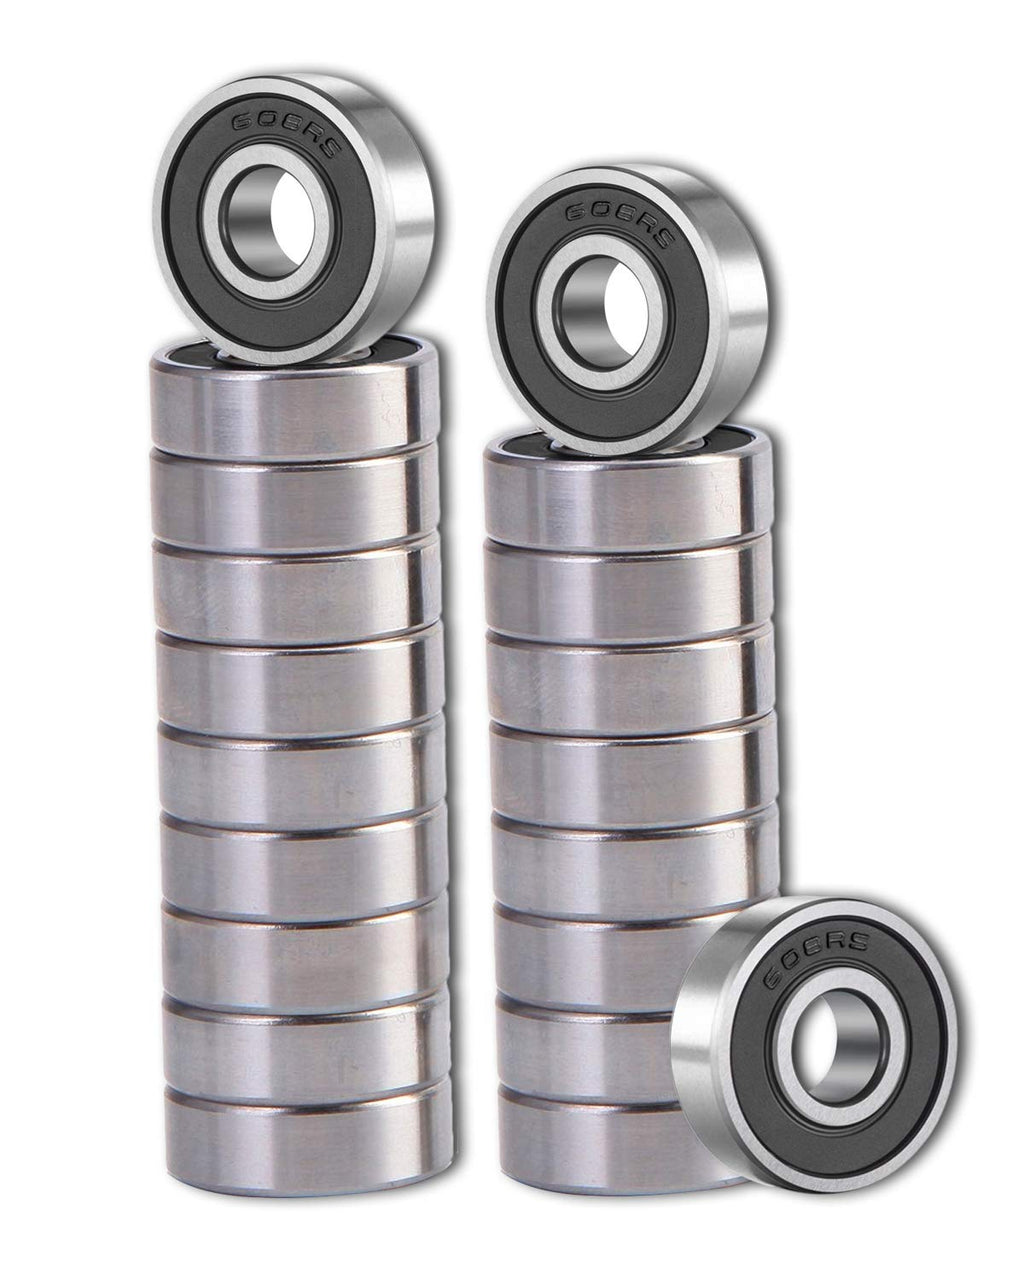  [AUSTRALIA] - 20 Pcs 608 2RS Ball Bearings – Bearing Steel and Double Rubber Sealed Miniature Deep Groove Ball Bearings (8mm x 22mm x 7mm)